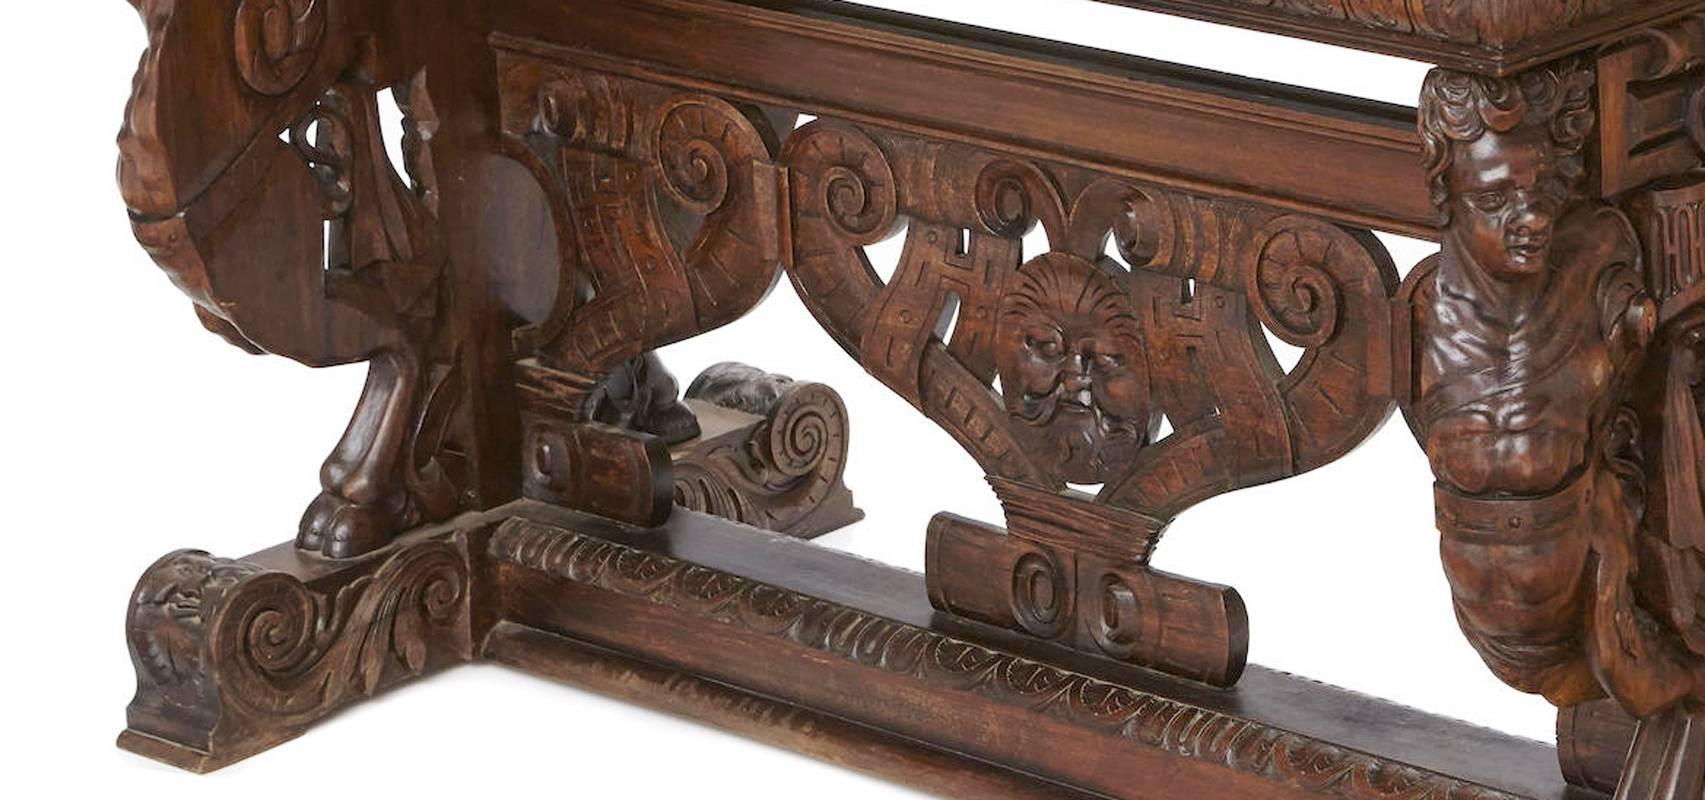 This fabulous 19th century Continental Renaissance style finely carved walnut library table featuring a floral and figural motif with ornate stretcher.
Measures: H. 32 inches x W. 52 inches x D. 30 inches.
Keywords: Center table, entry hall table.